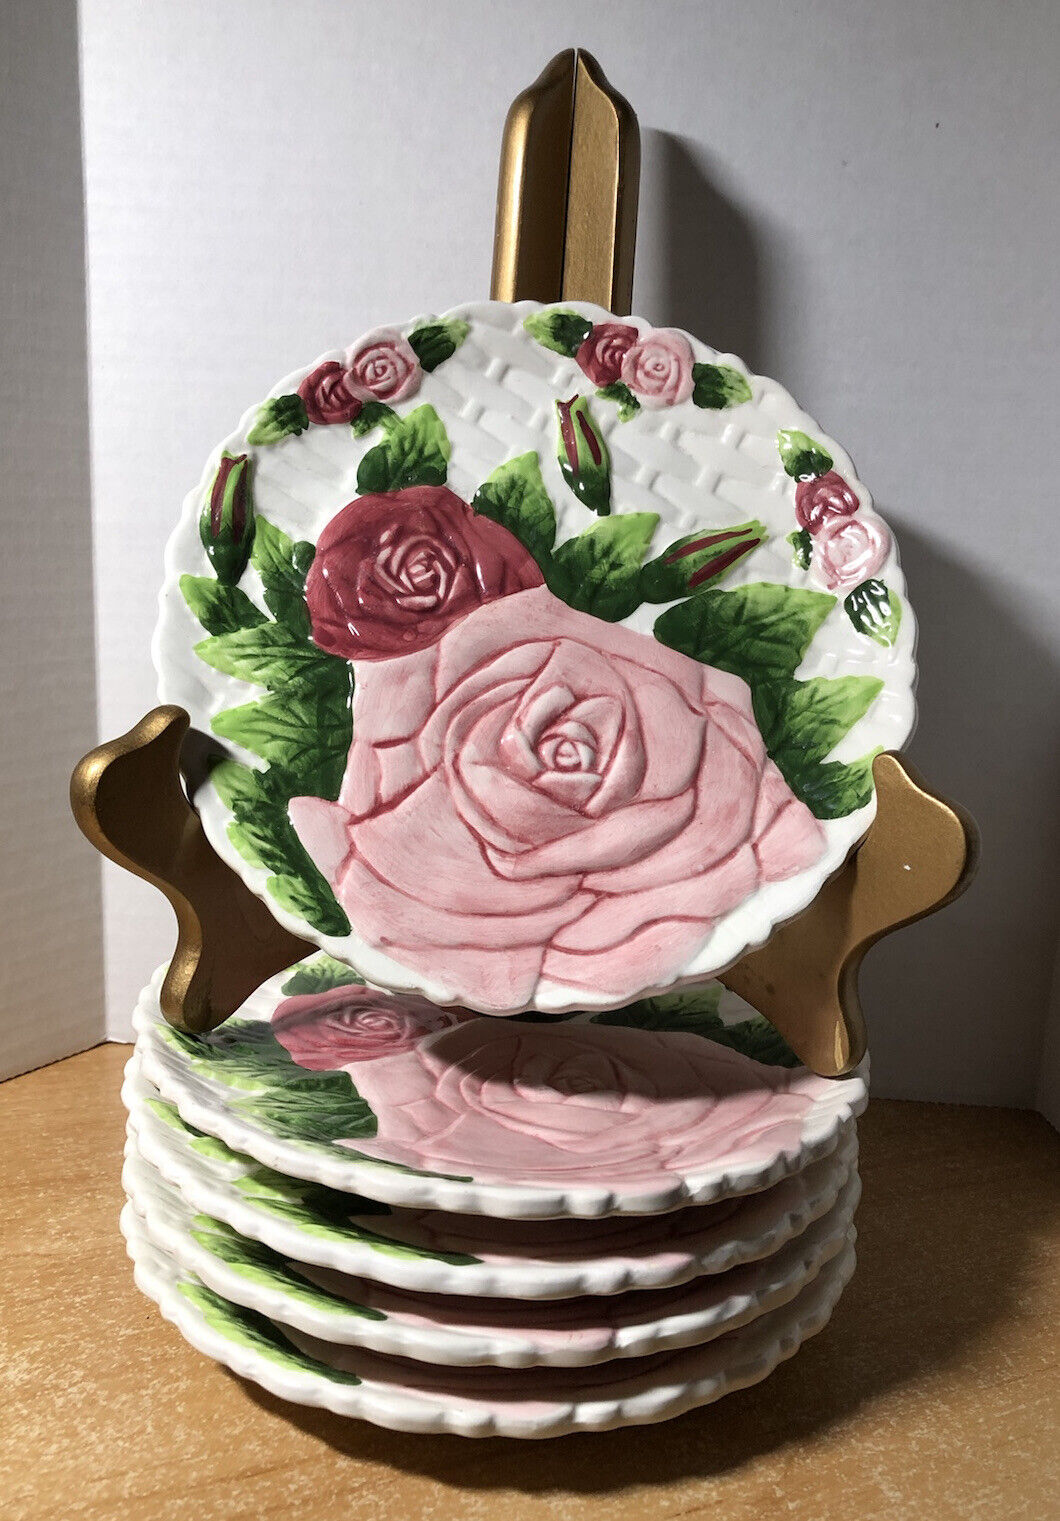 5 KMC Raised Pink Roses Small Plate Dish 6 1/2 “